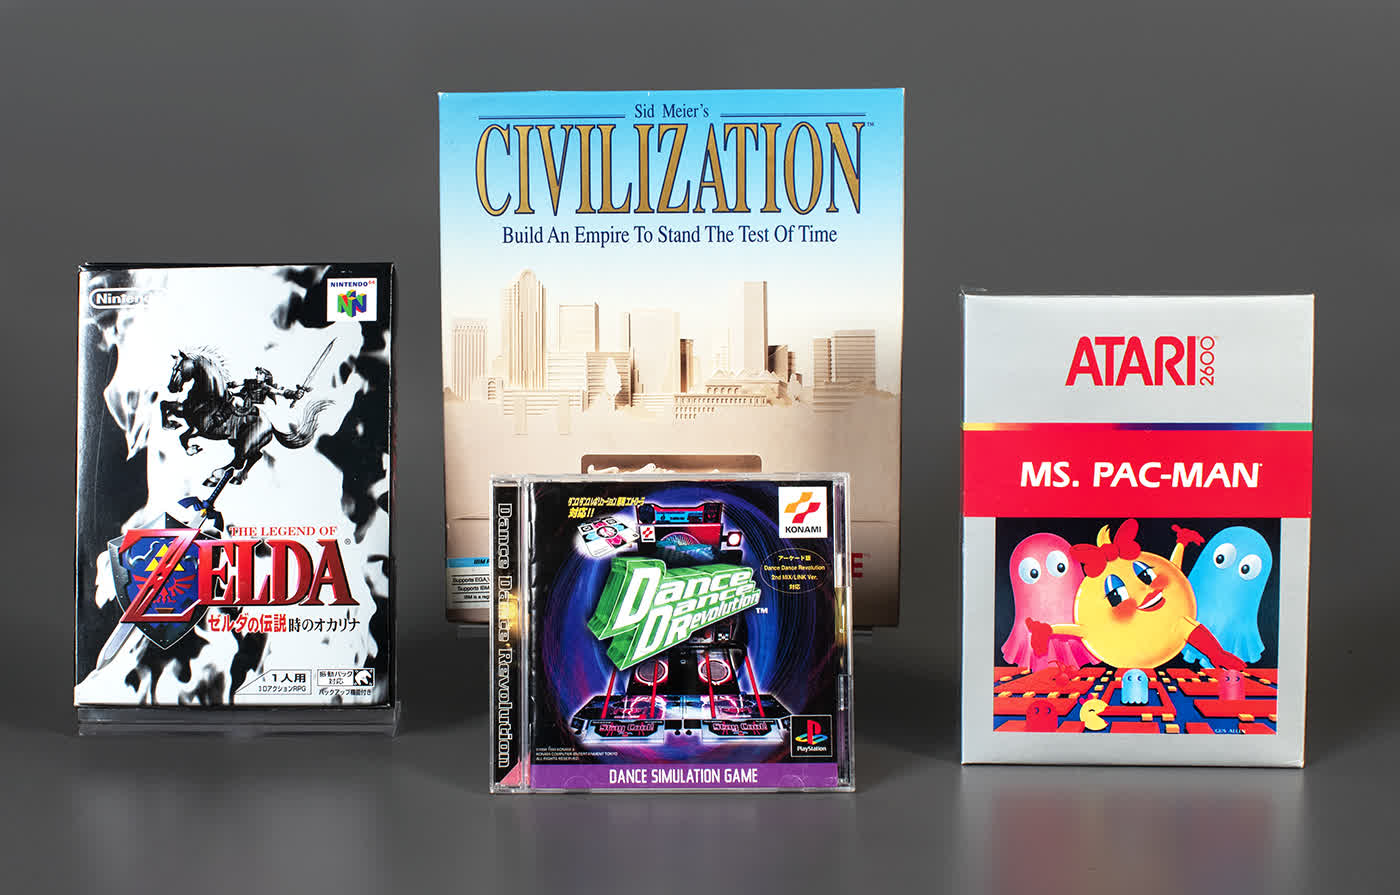 Zelda: Ocarina of Time and Sid Meier's Civilization join the World Video Game Hall of Fame